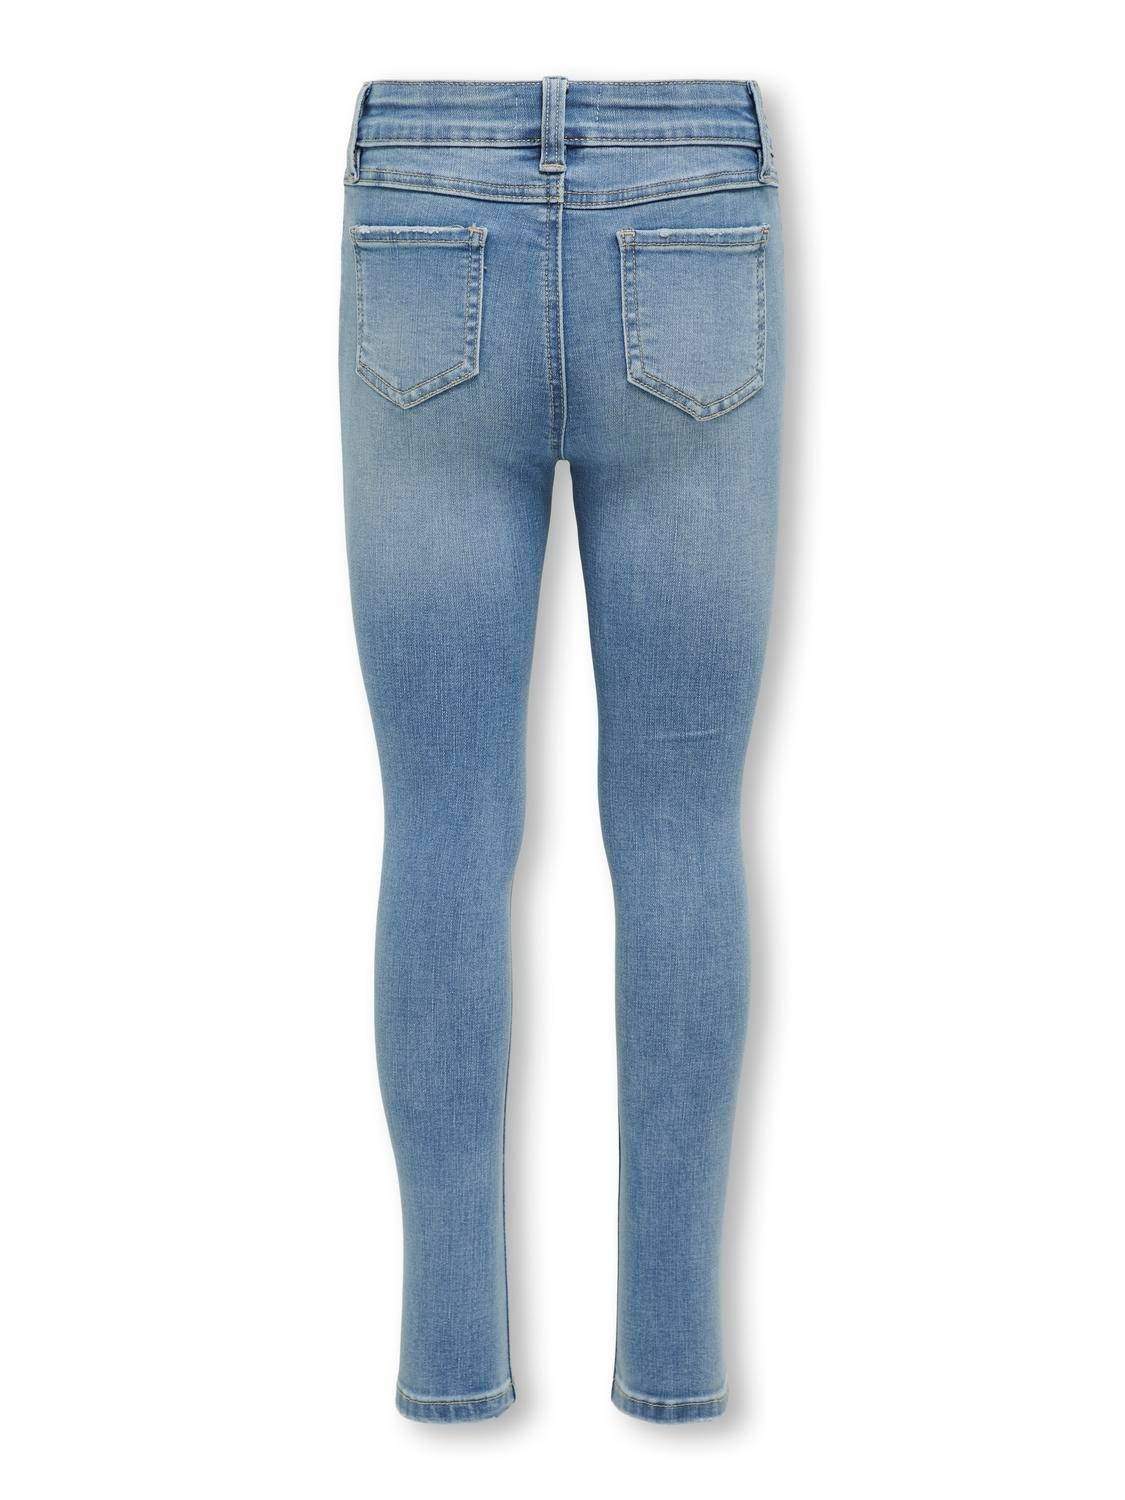 ONLY Skinny Fit Hohe Taille Jeans -Light Blue Denim - 15315066